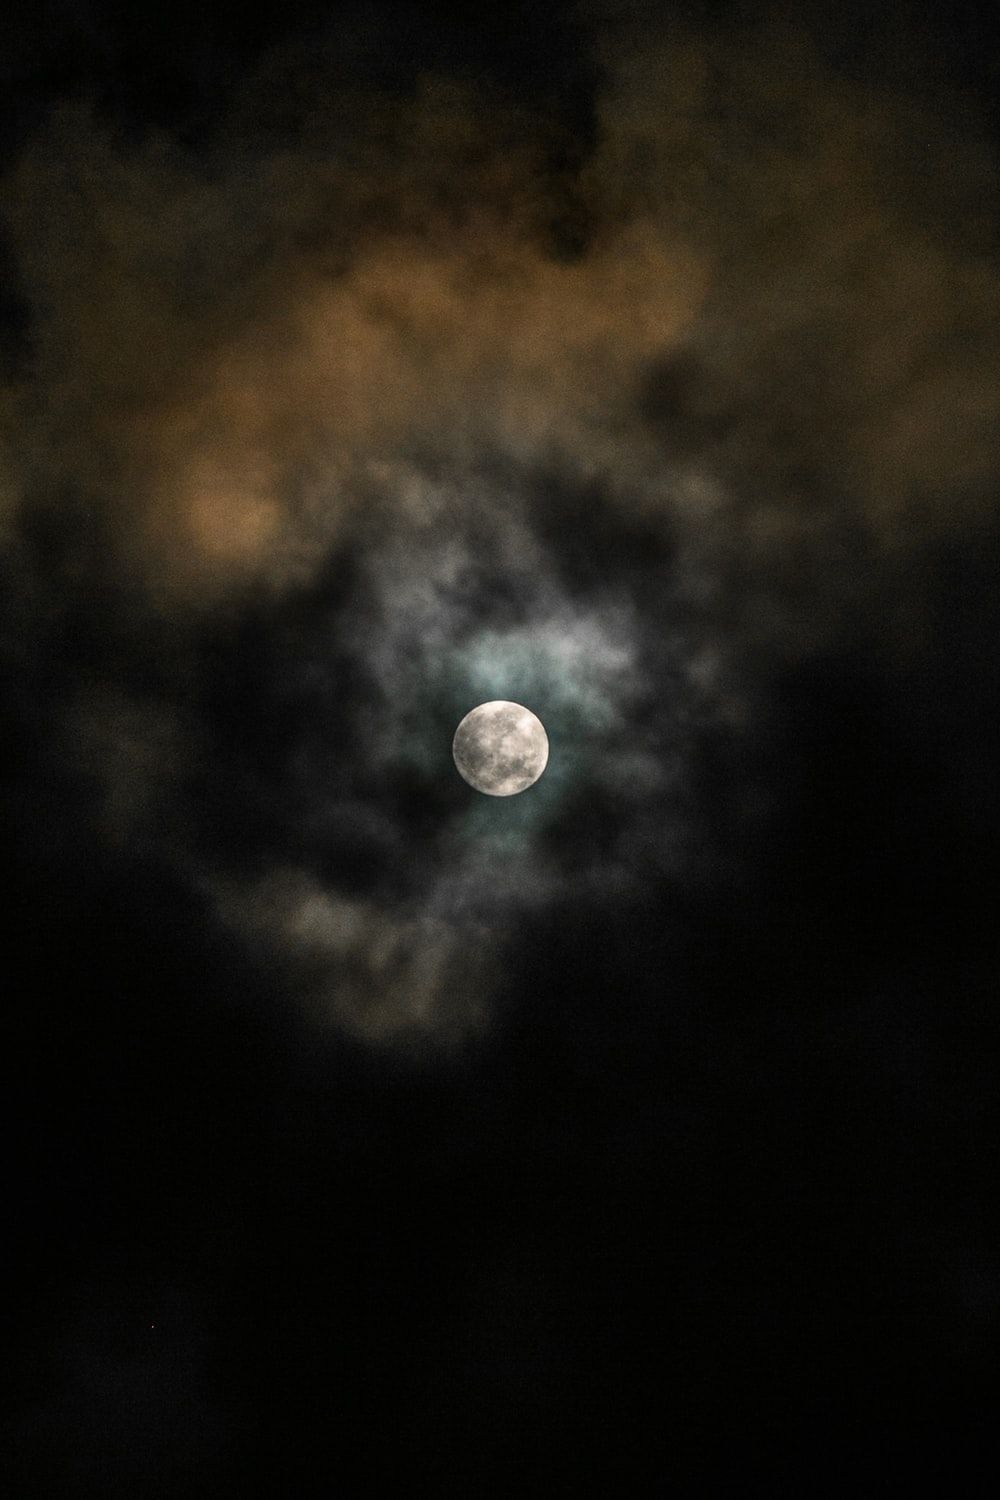 Moon And Clouds Picture. Download Free Image